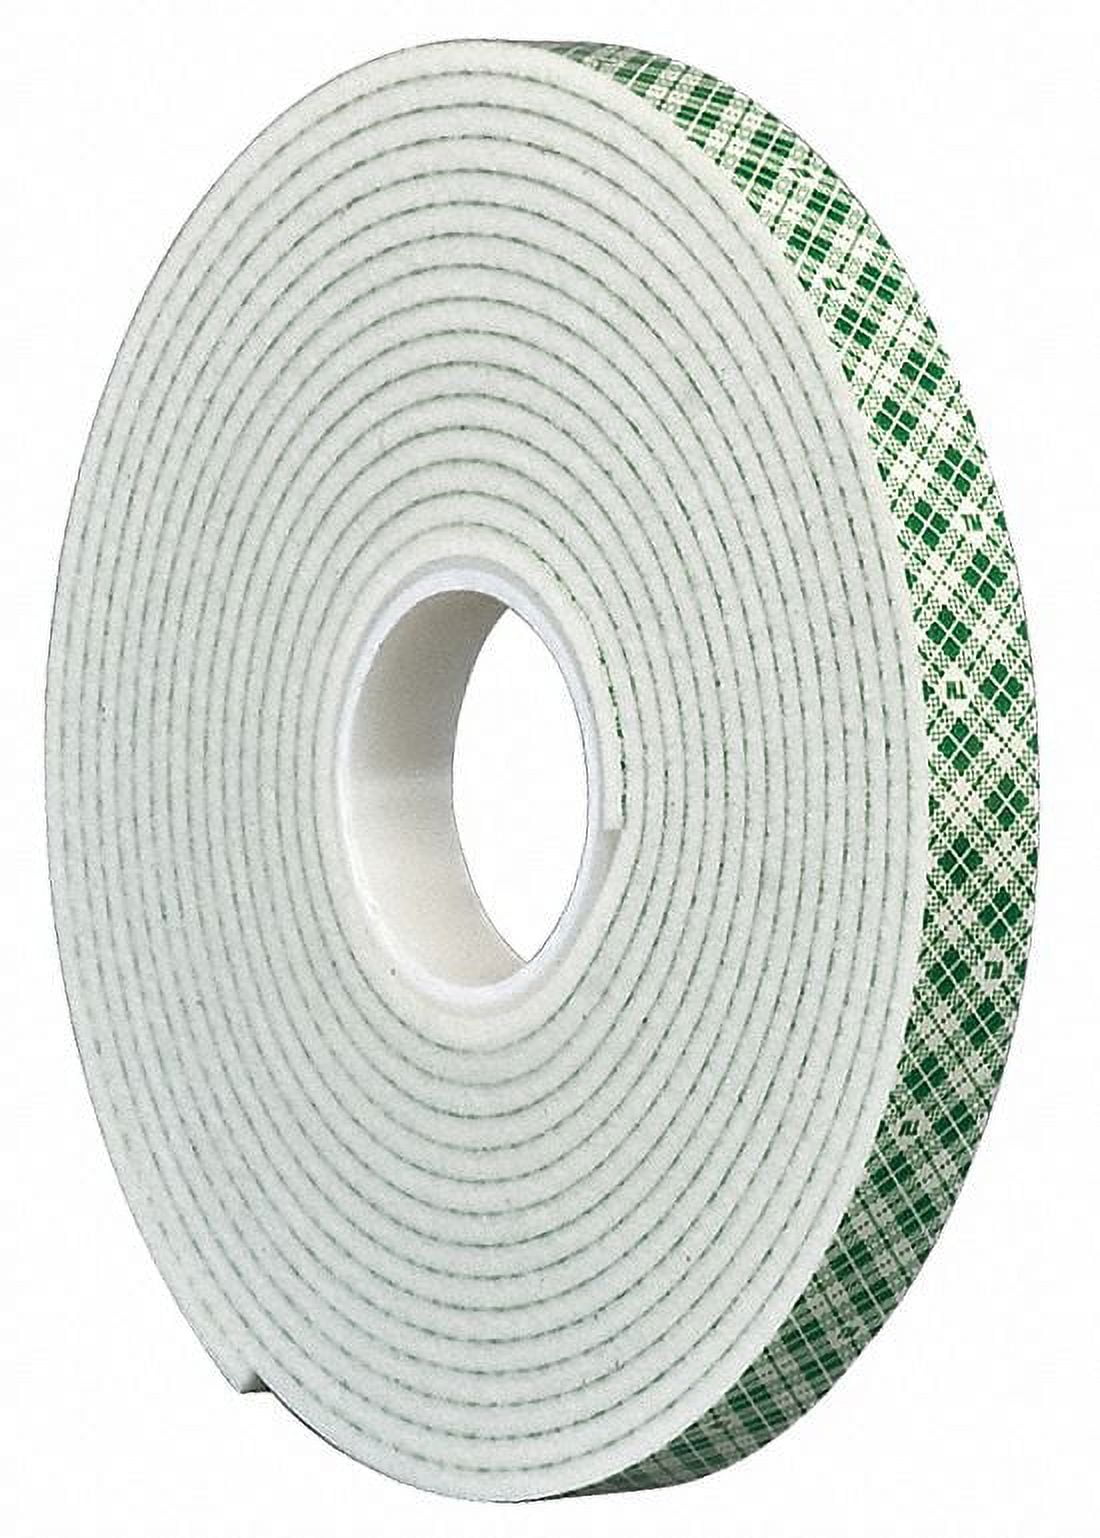 3M 4026 Double-Sided Foam Tape Squares - 3/4 x 3/4